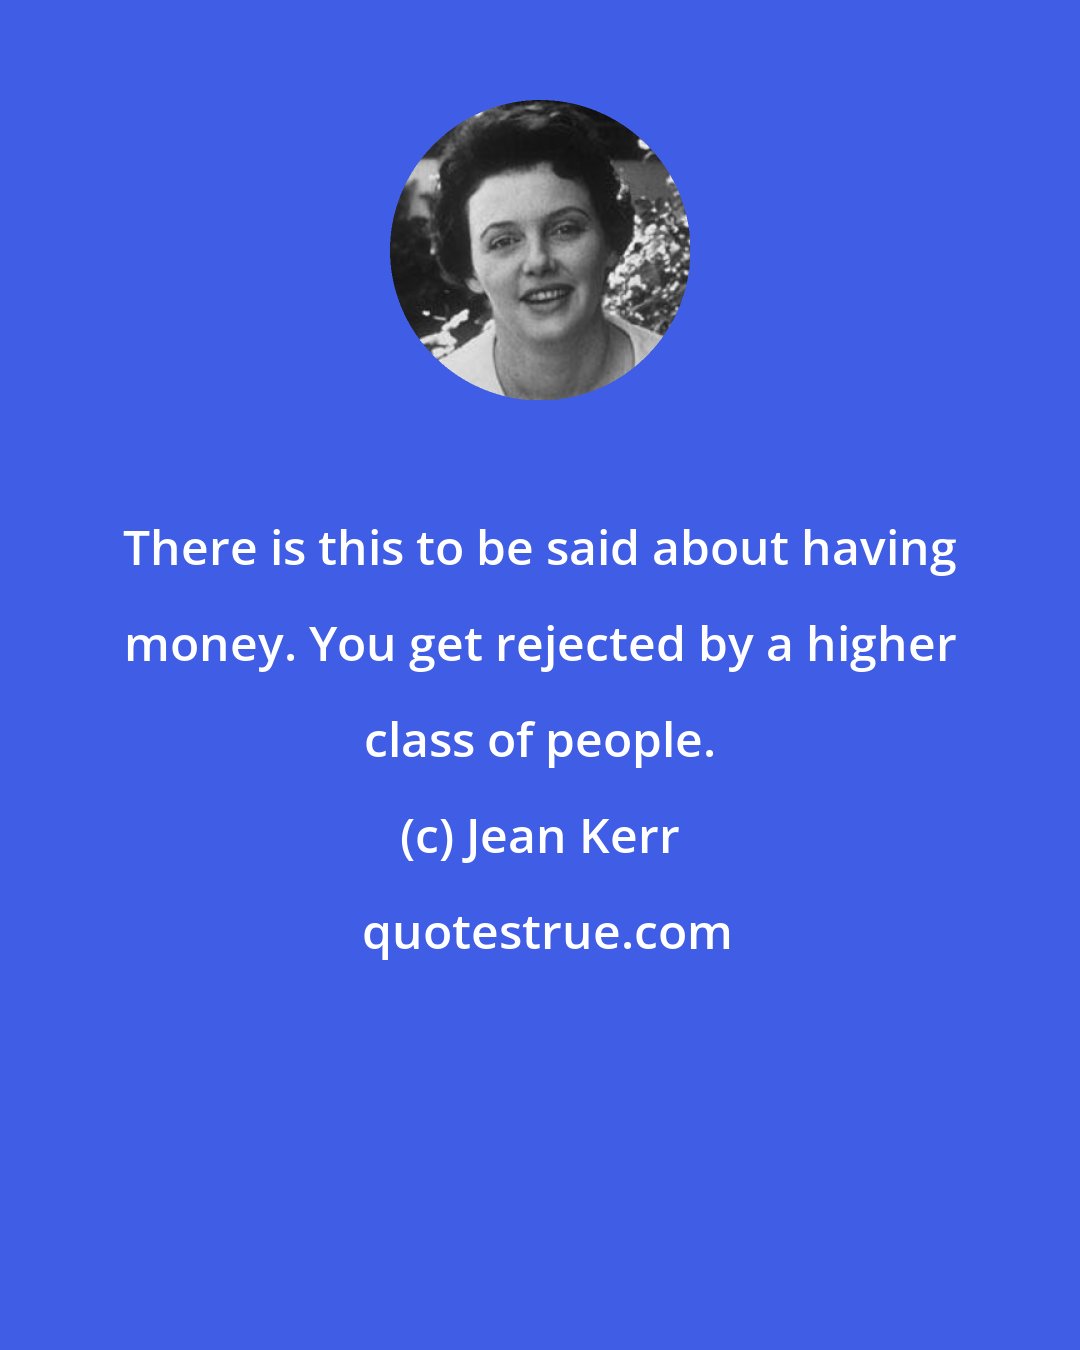 Jean Kerr: There is this to be said about having money. You get rejected by a higher class of people.